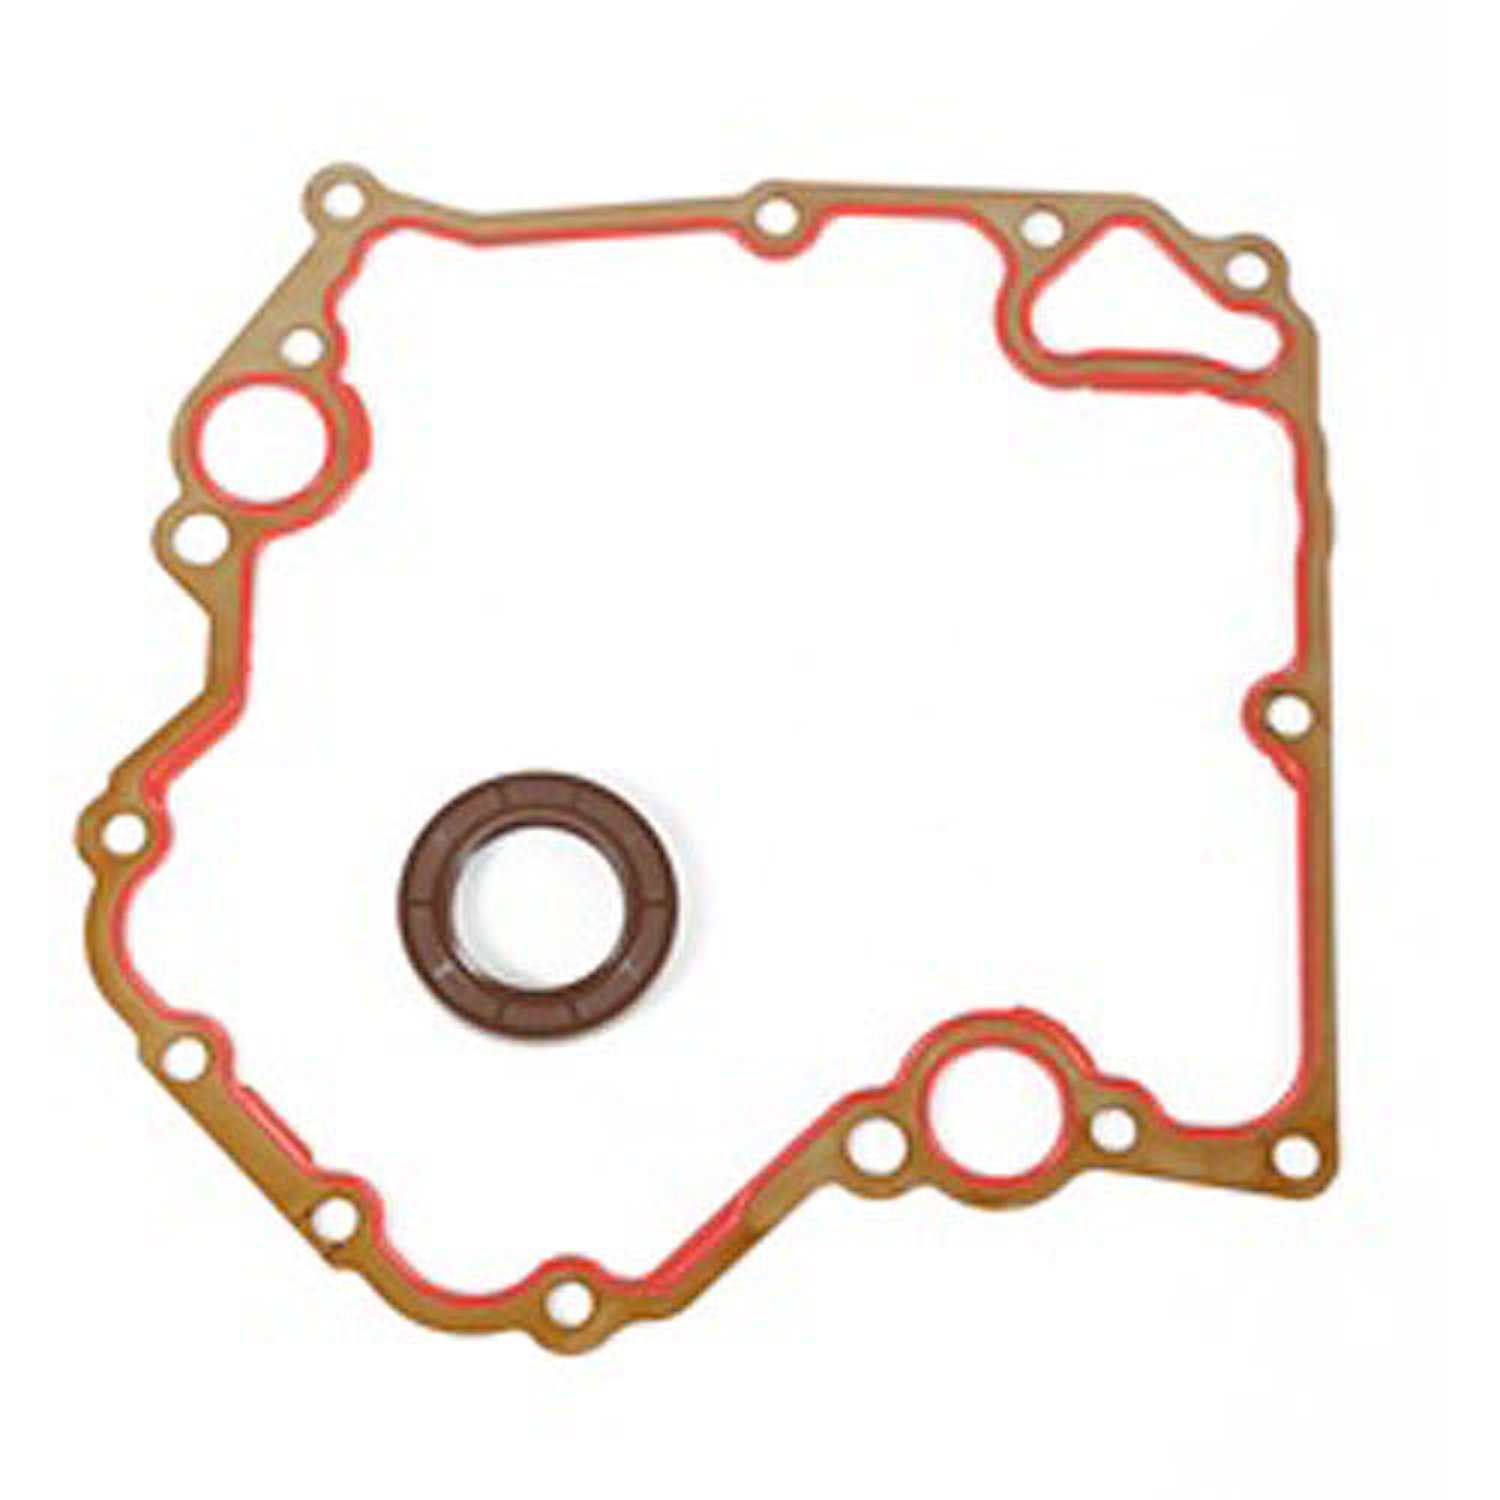 This timing cover gasket set from Omix-ADA fits